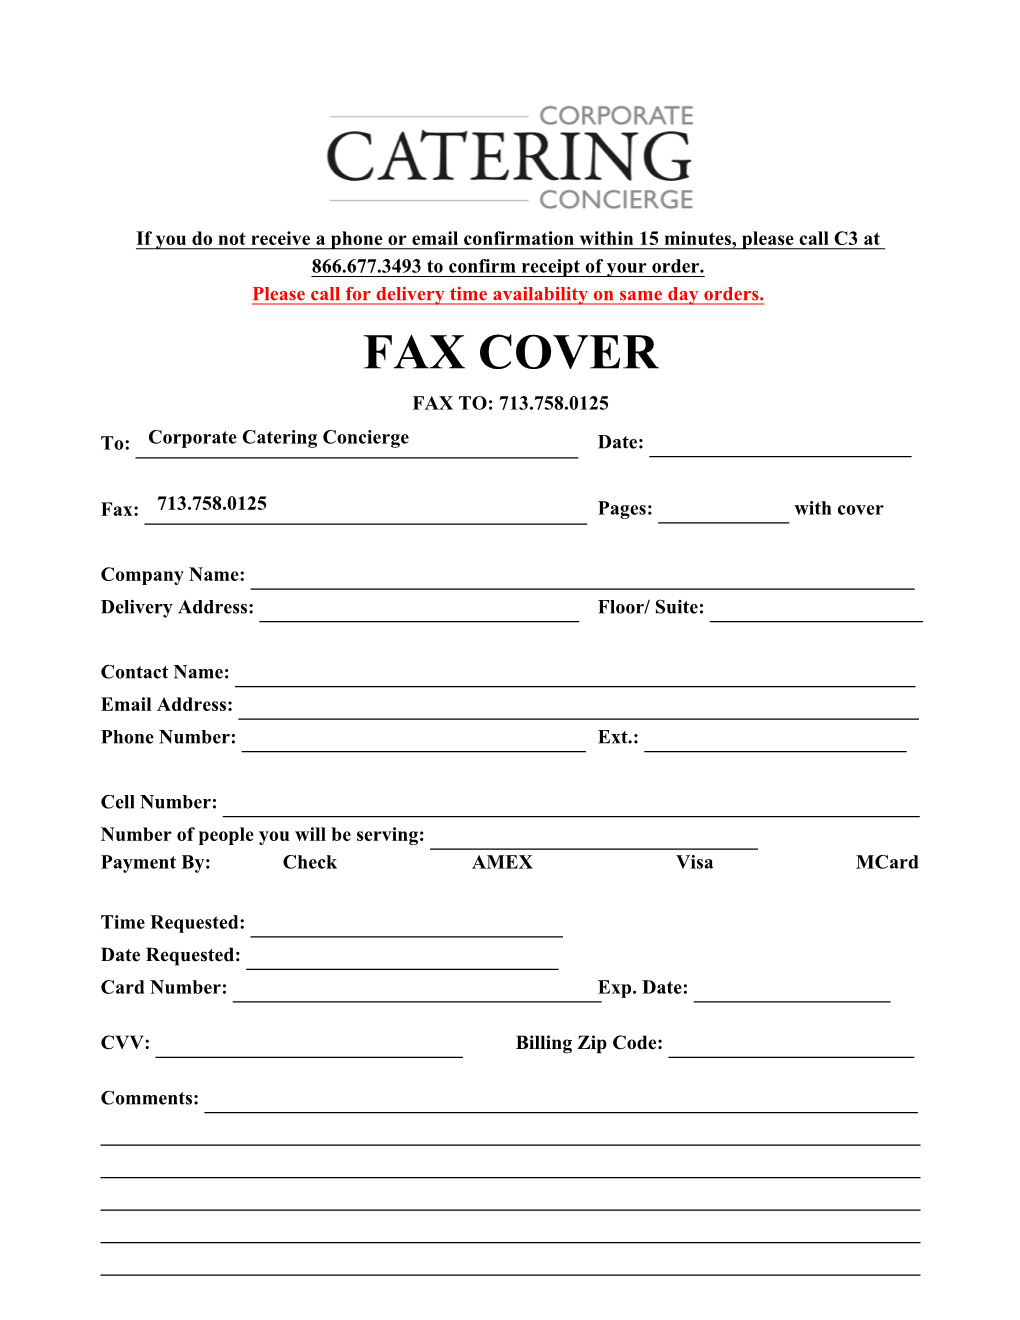 FAX COVER FAX TO: 713.758.0125 To: Corporate Catering Concierge Date